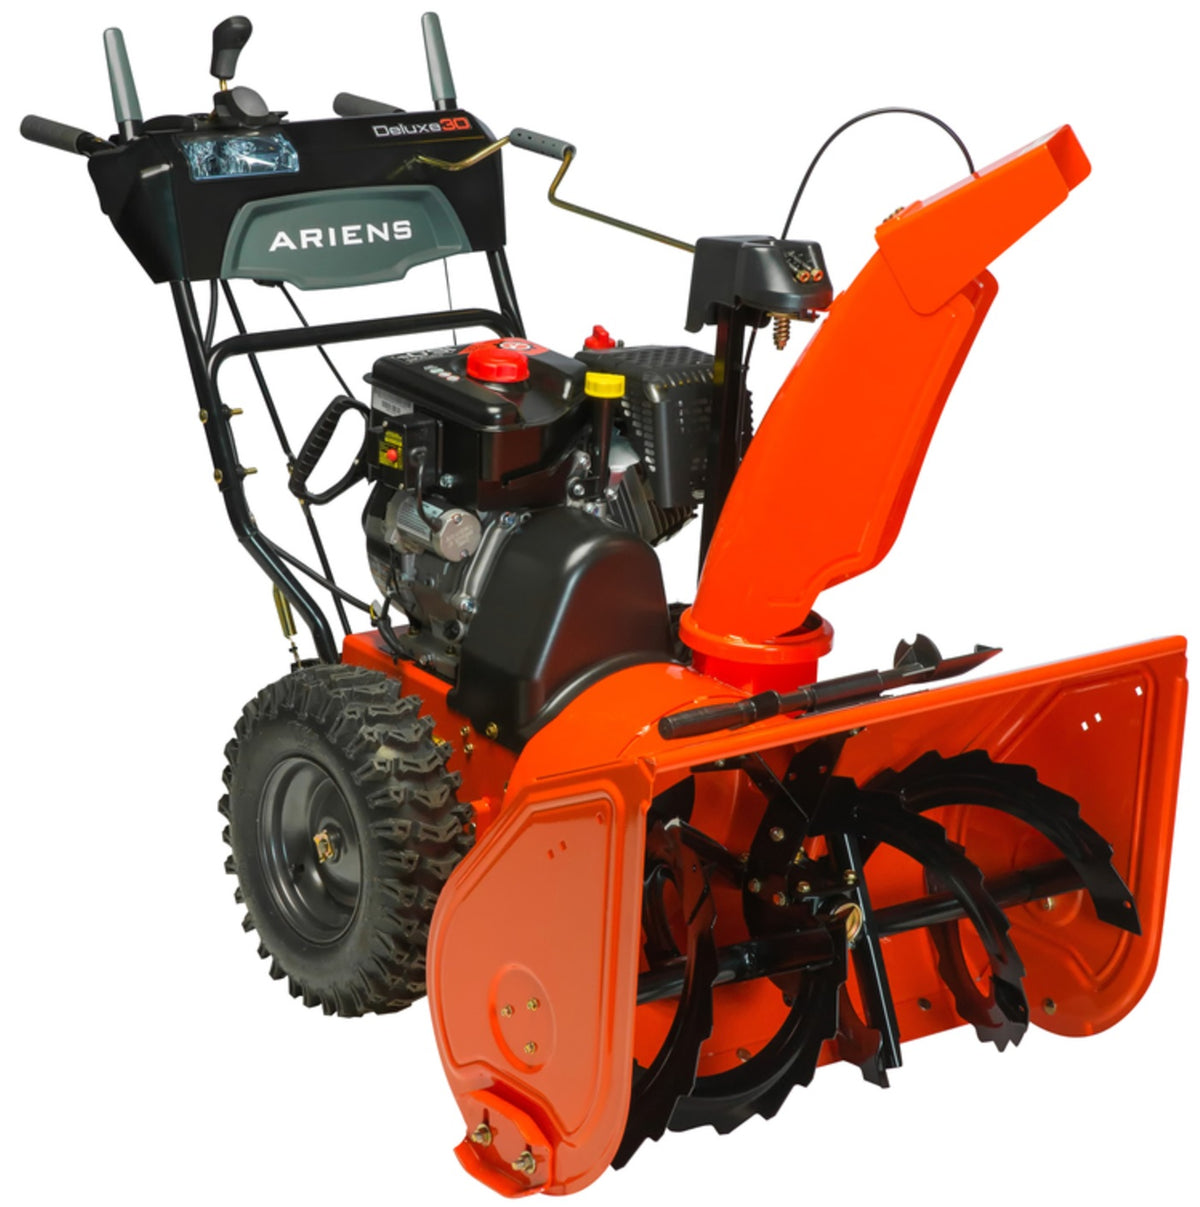 Ariens 92104700 Deluxe Two-Stage Electric Start Gas Snow Blower, Orange, 306CC